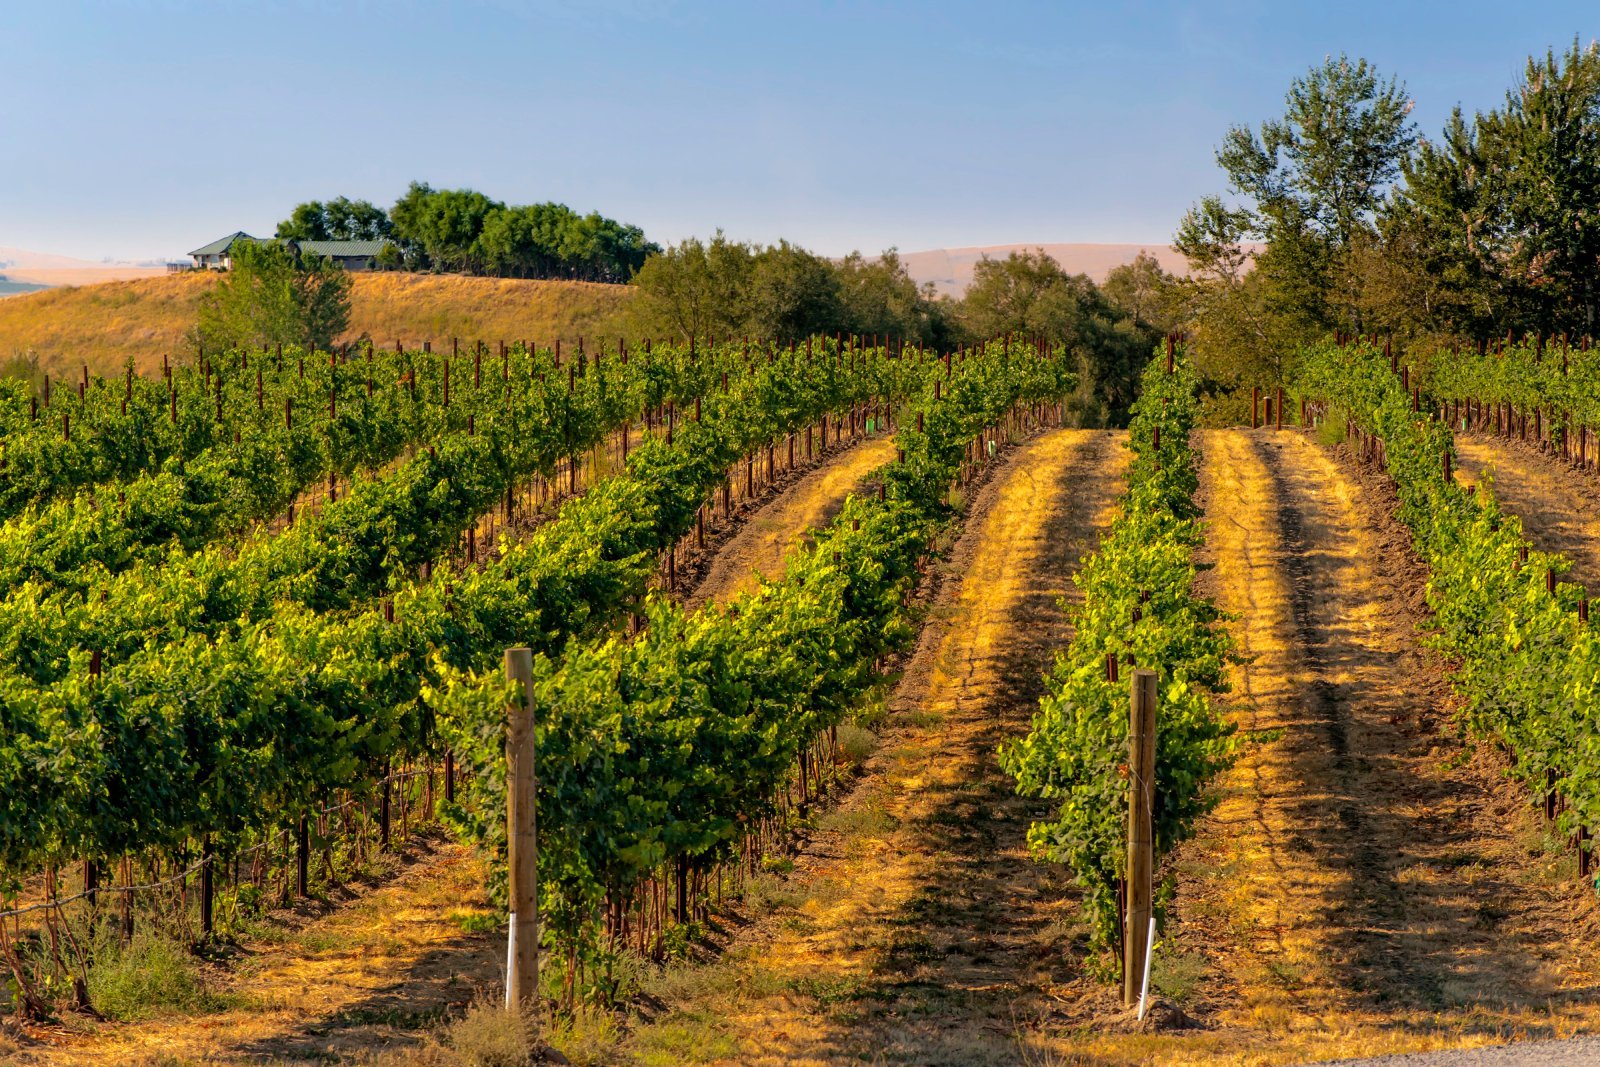 Image Credit: Shutterstock / Danita Delimont <p>Walla Walla is a treat for wine lovers looking for a laid-back vibe without the Napa markup. The local wine scene is robust and the community welcoming, making for a soothing escape.</p>